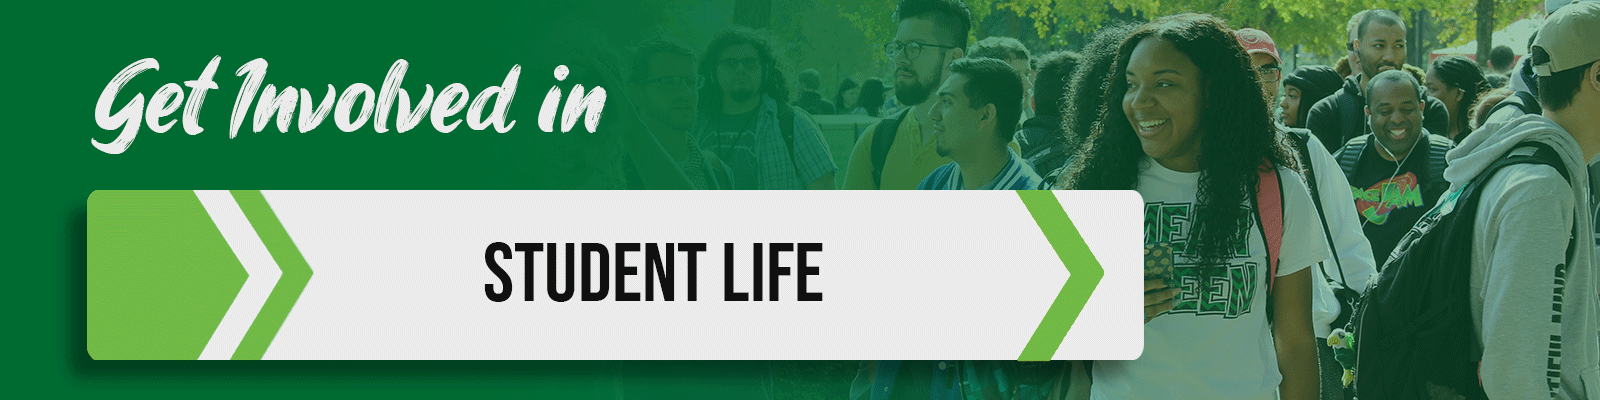 Get Involved in Student Life